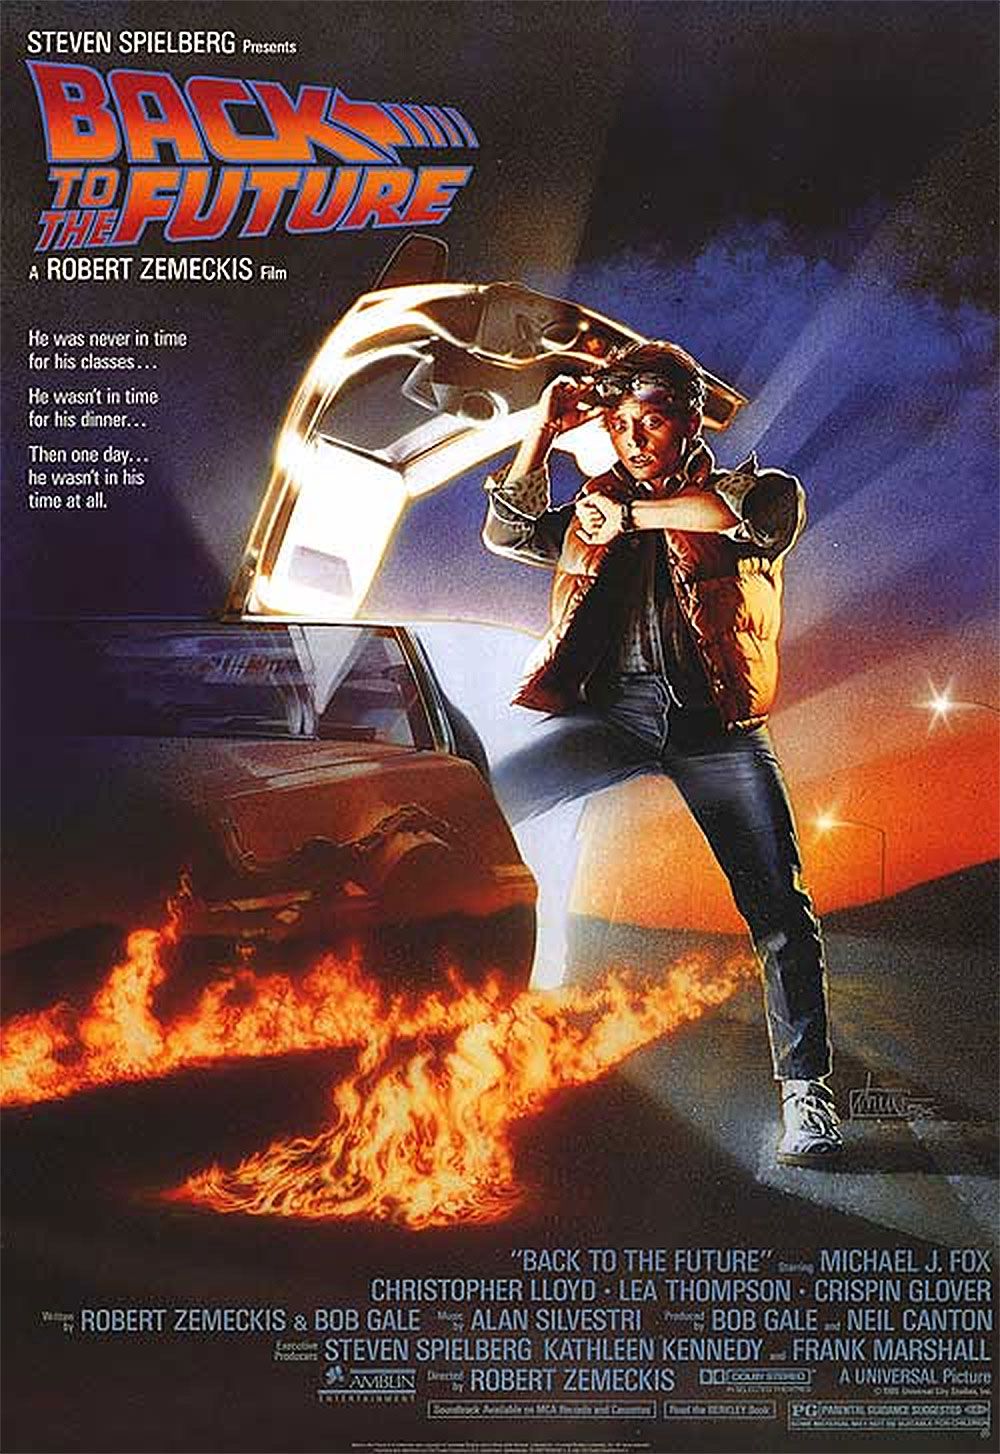 The original 1980s poster for Back to the Future